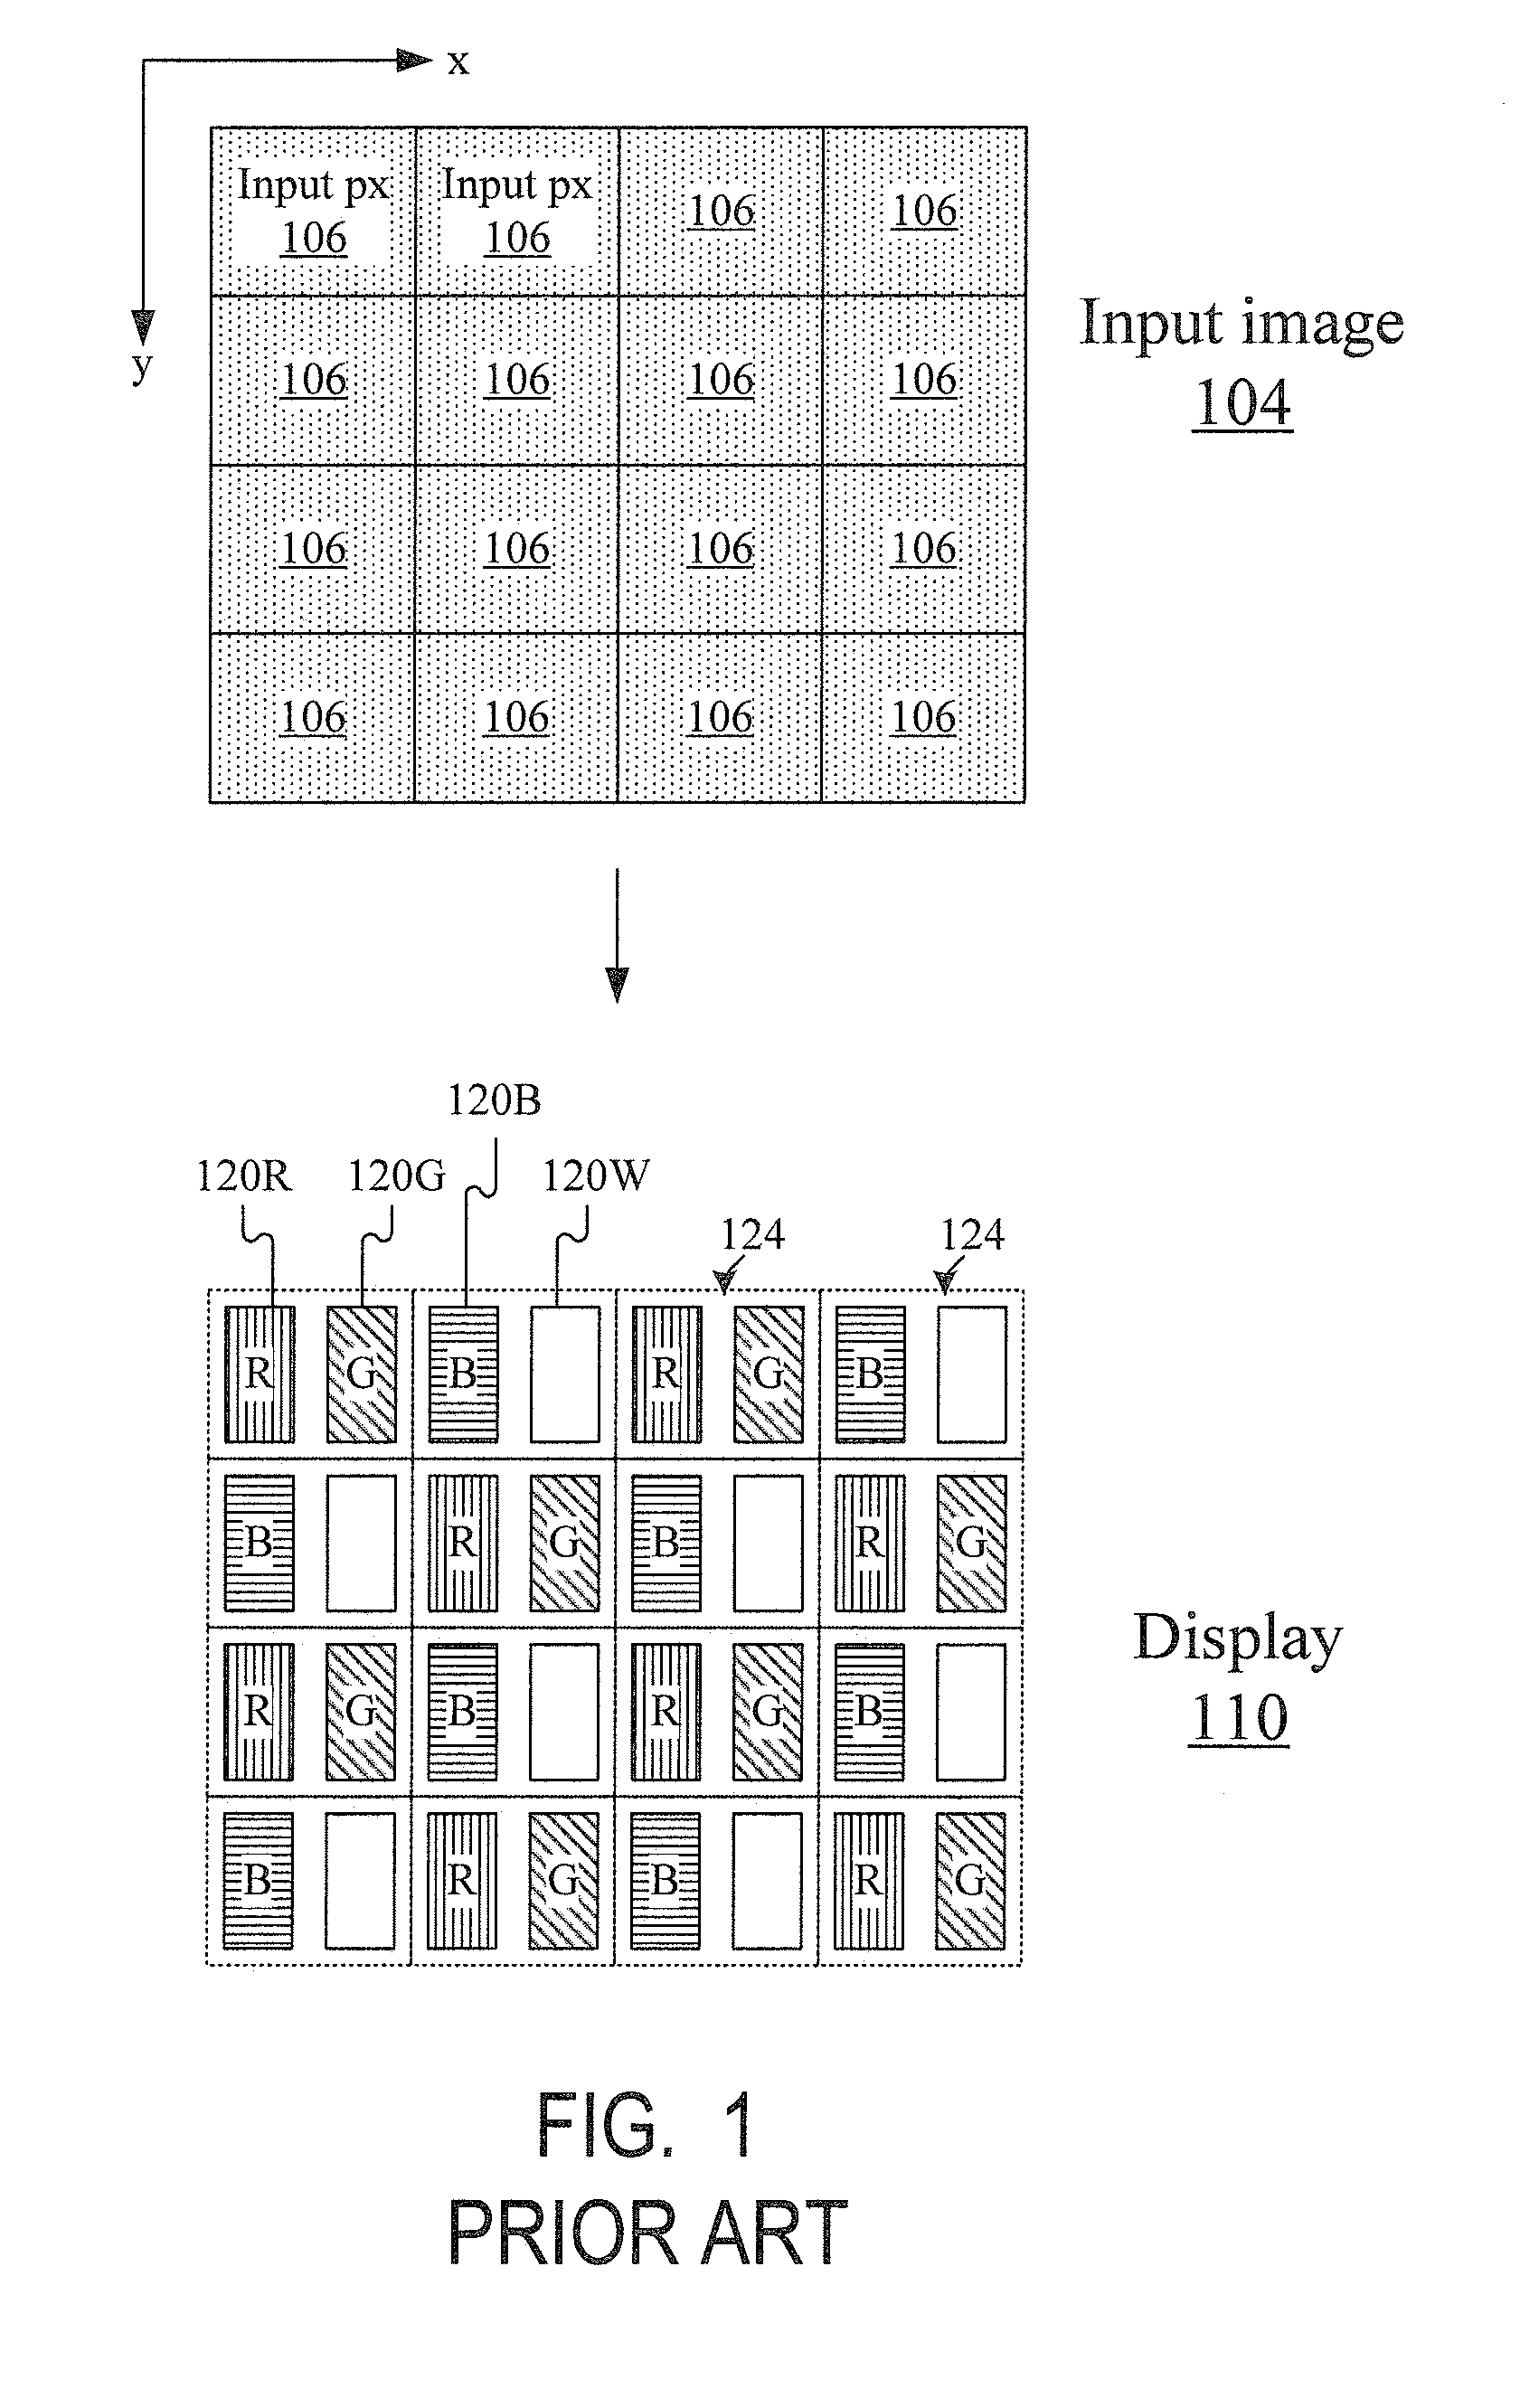 Gamut mapping which takes into account pixels in adjacent areas of a display unit